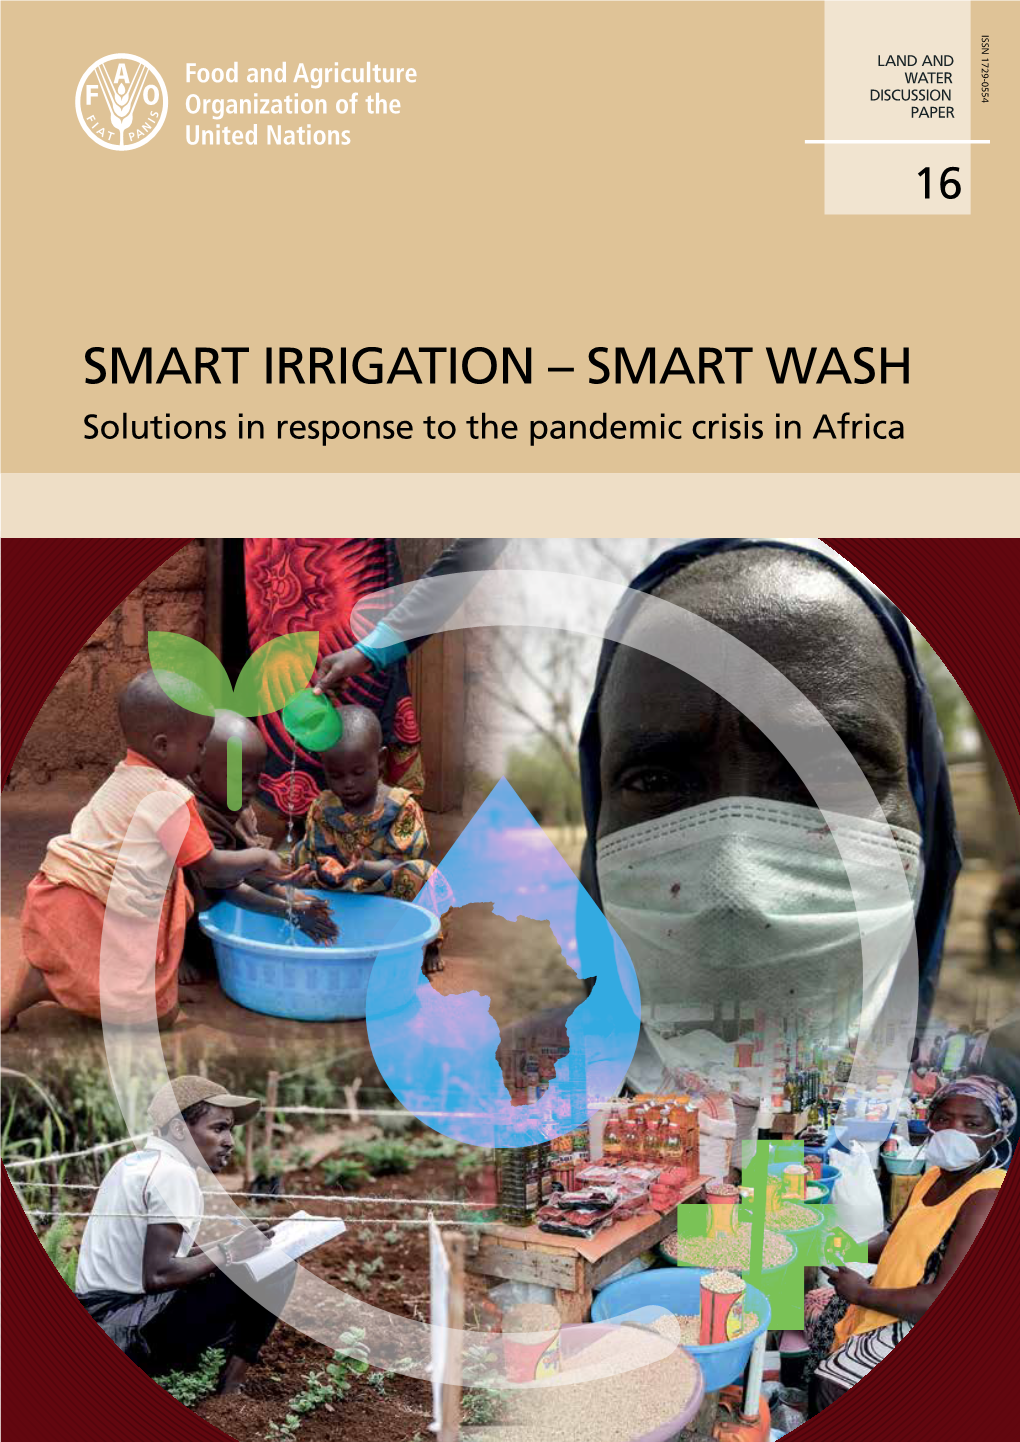 SMART IRRIGATION – SMART WASH Uncertainties Related to the Impacts of COVID-19 on Daily Life Are Increasingly Growing